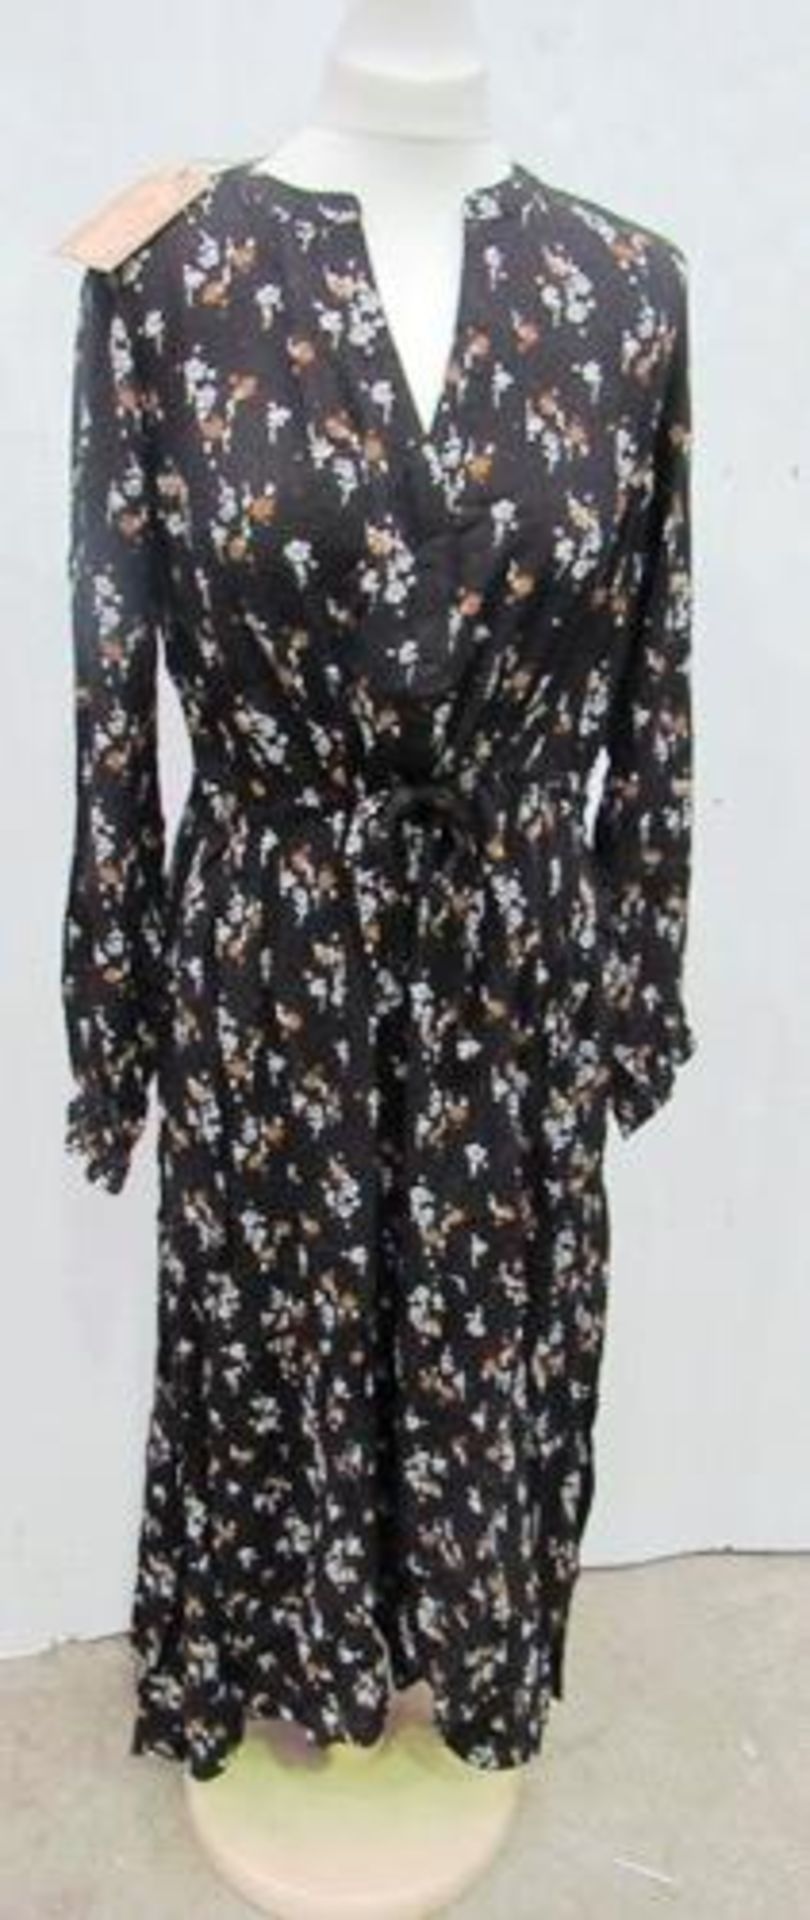 2 x Fat Face Joyce Star floral midi dress, 1 x size 16 and 1 x size 10, RRP £59.00 each - New with - Image 2 of 2